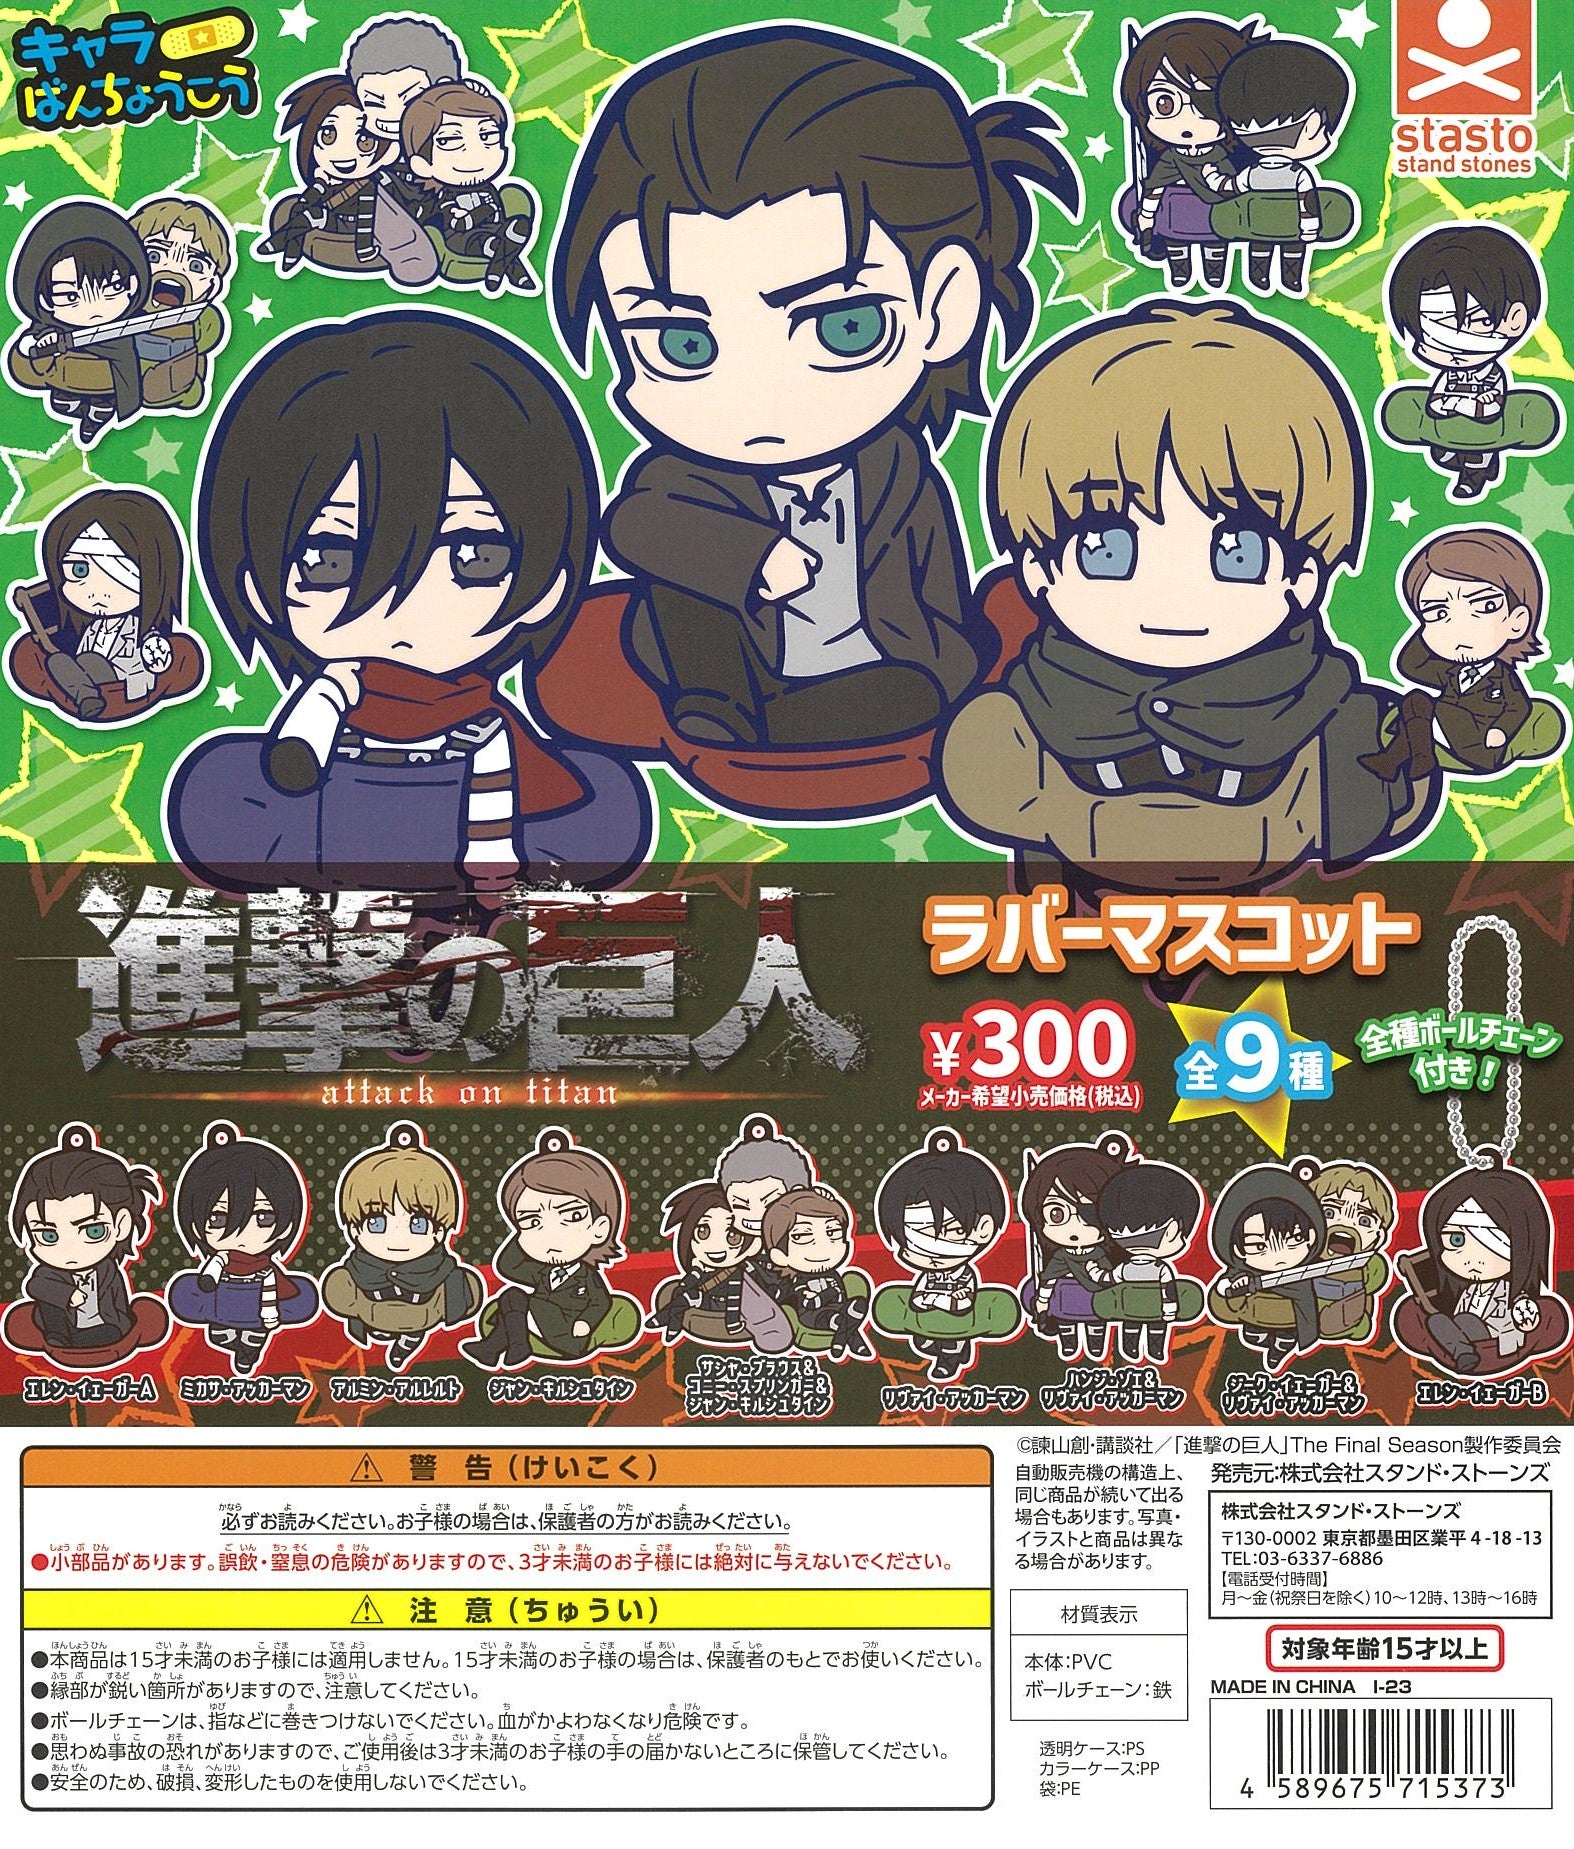 CP2530 Attack on Titan character Banchou Rubber Mascot